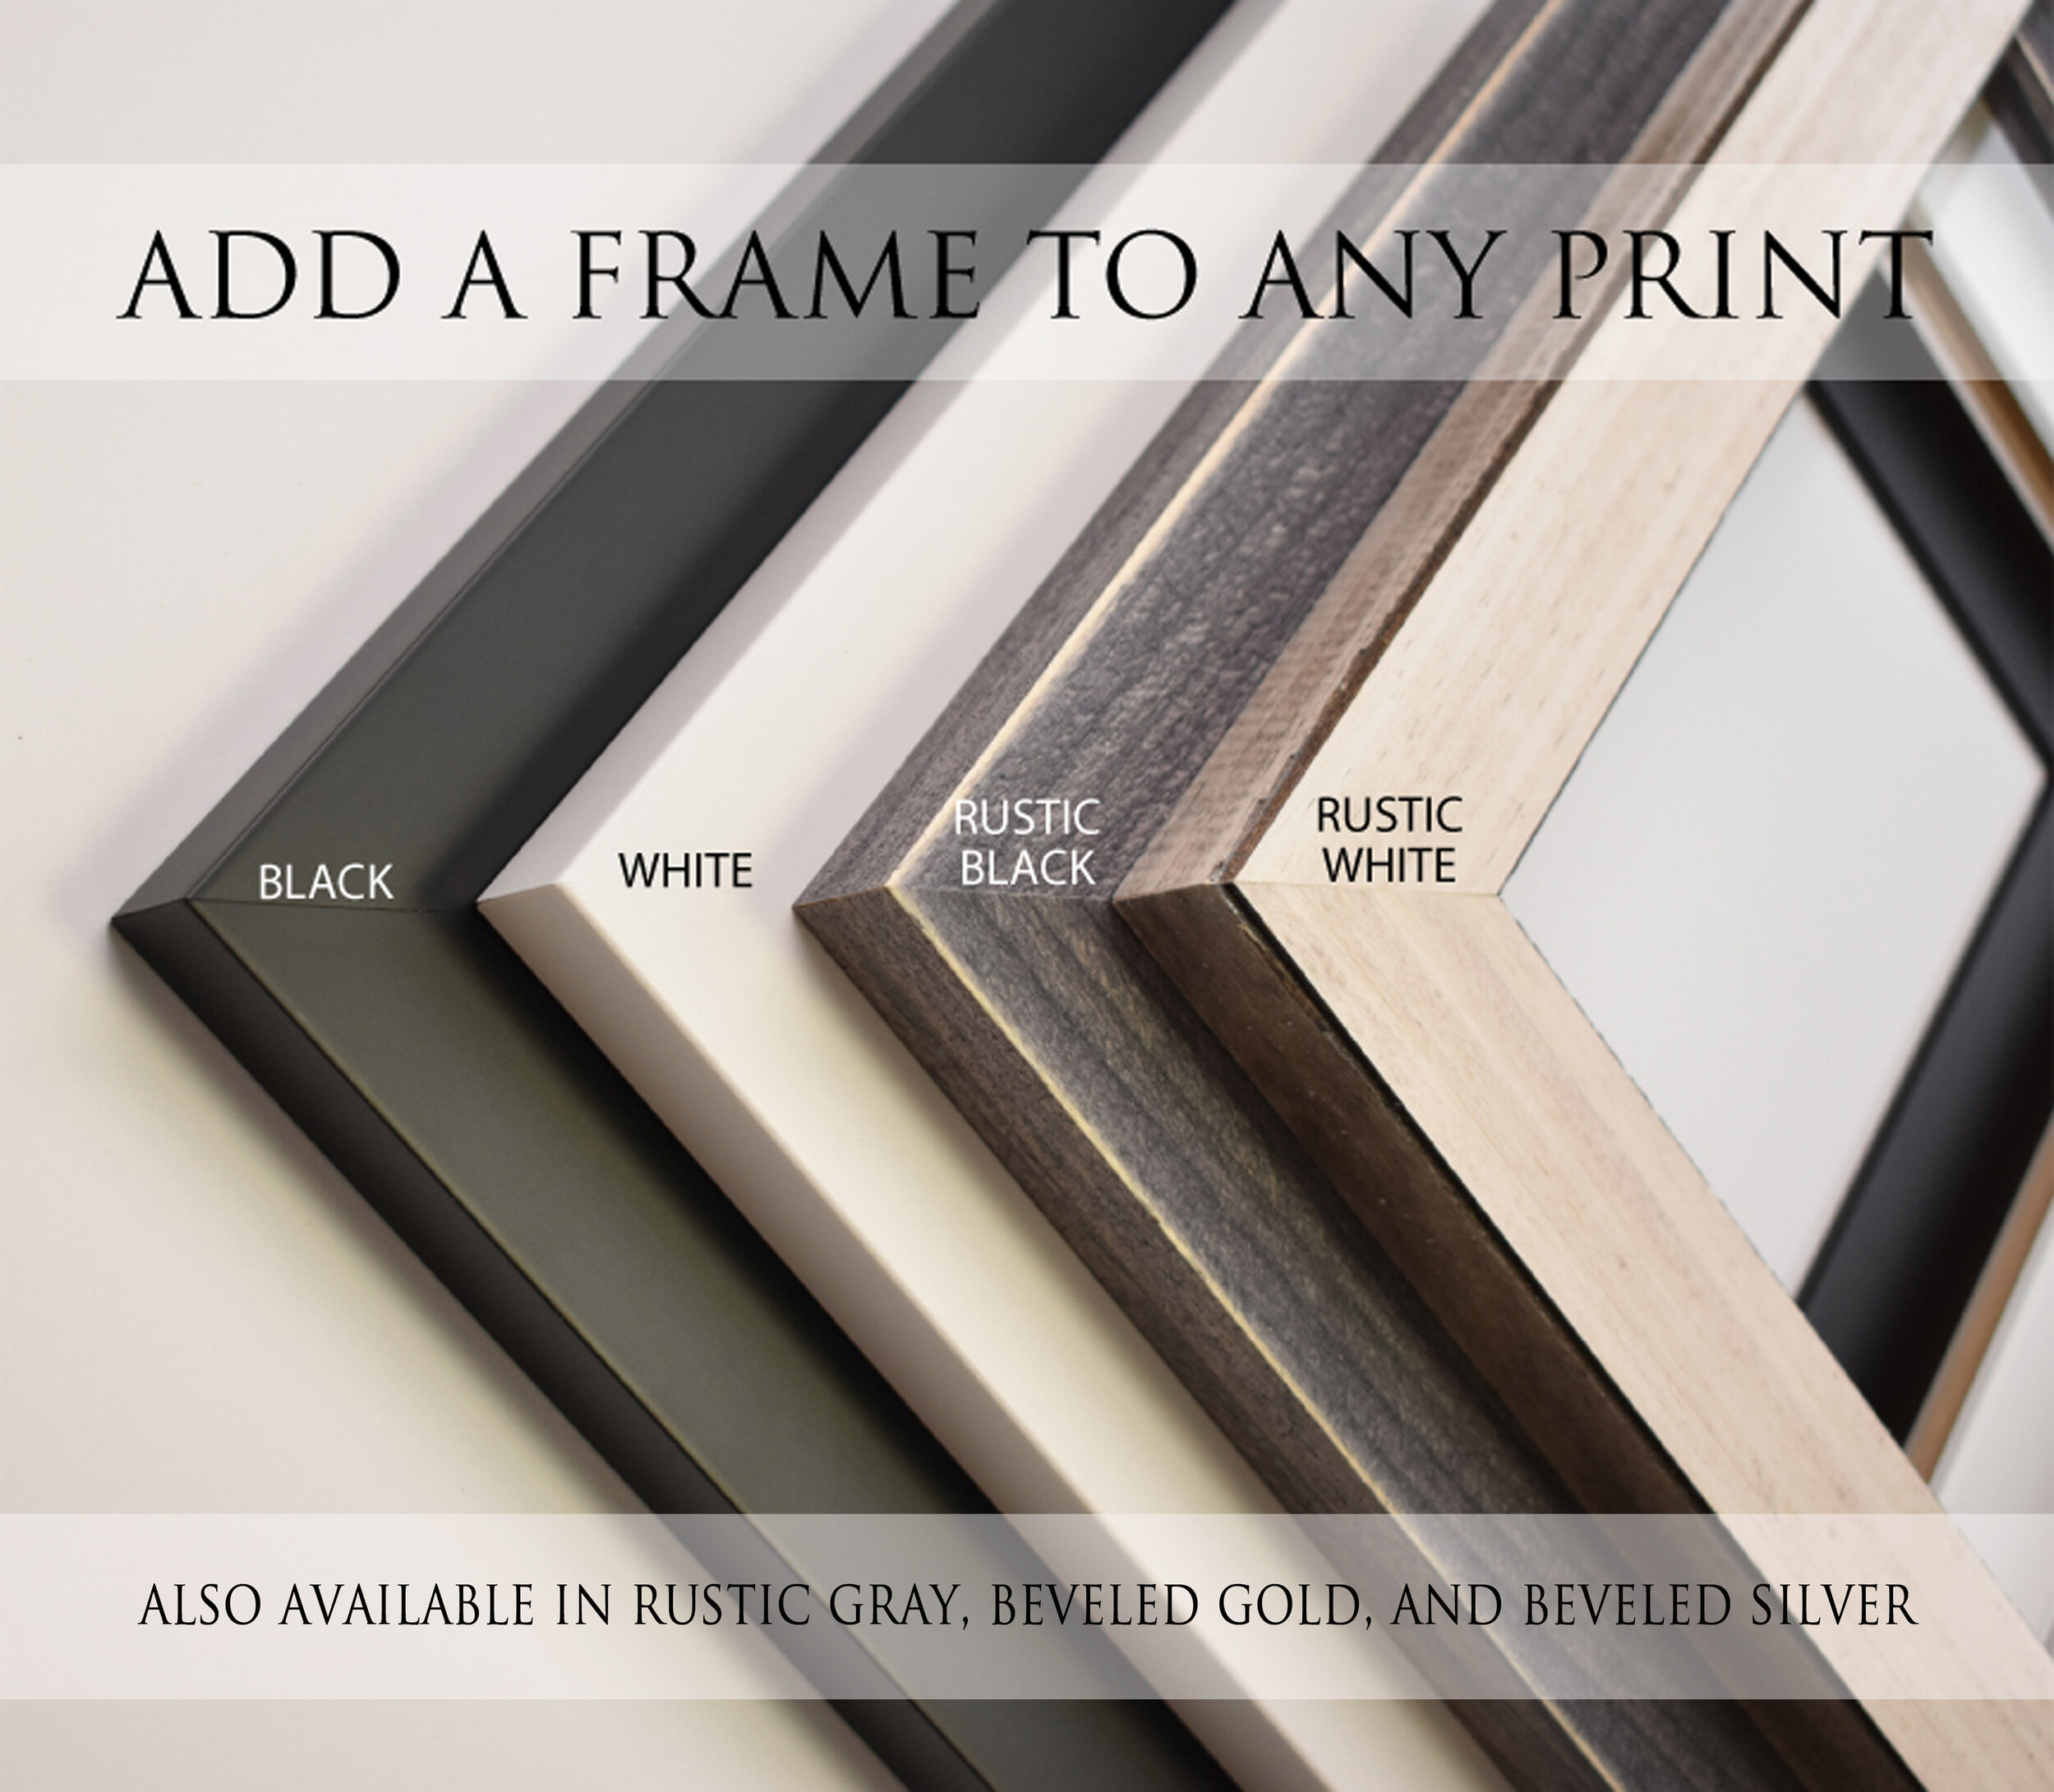 Add a frame to your print